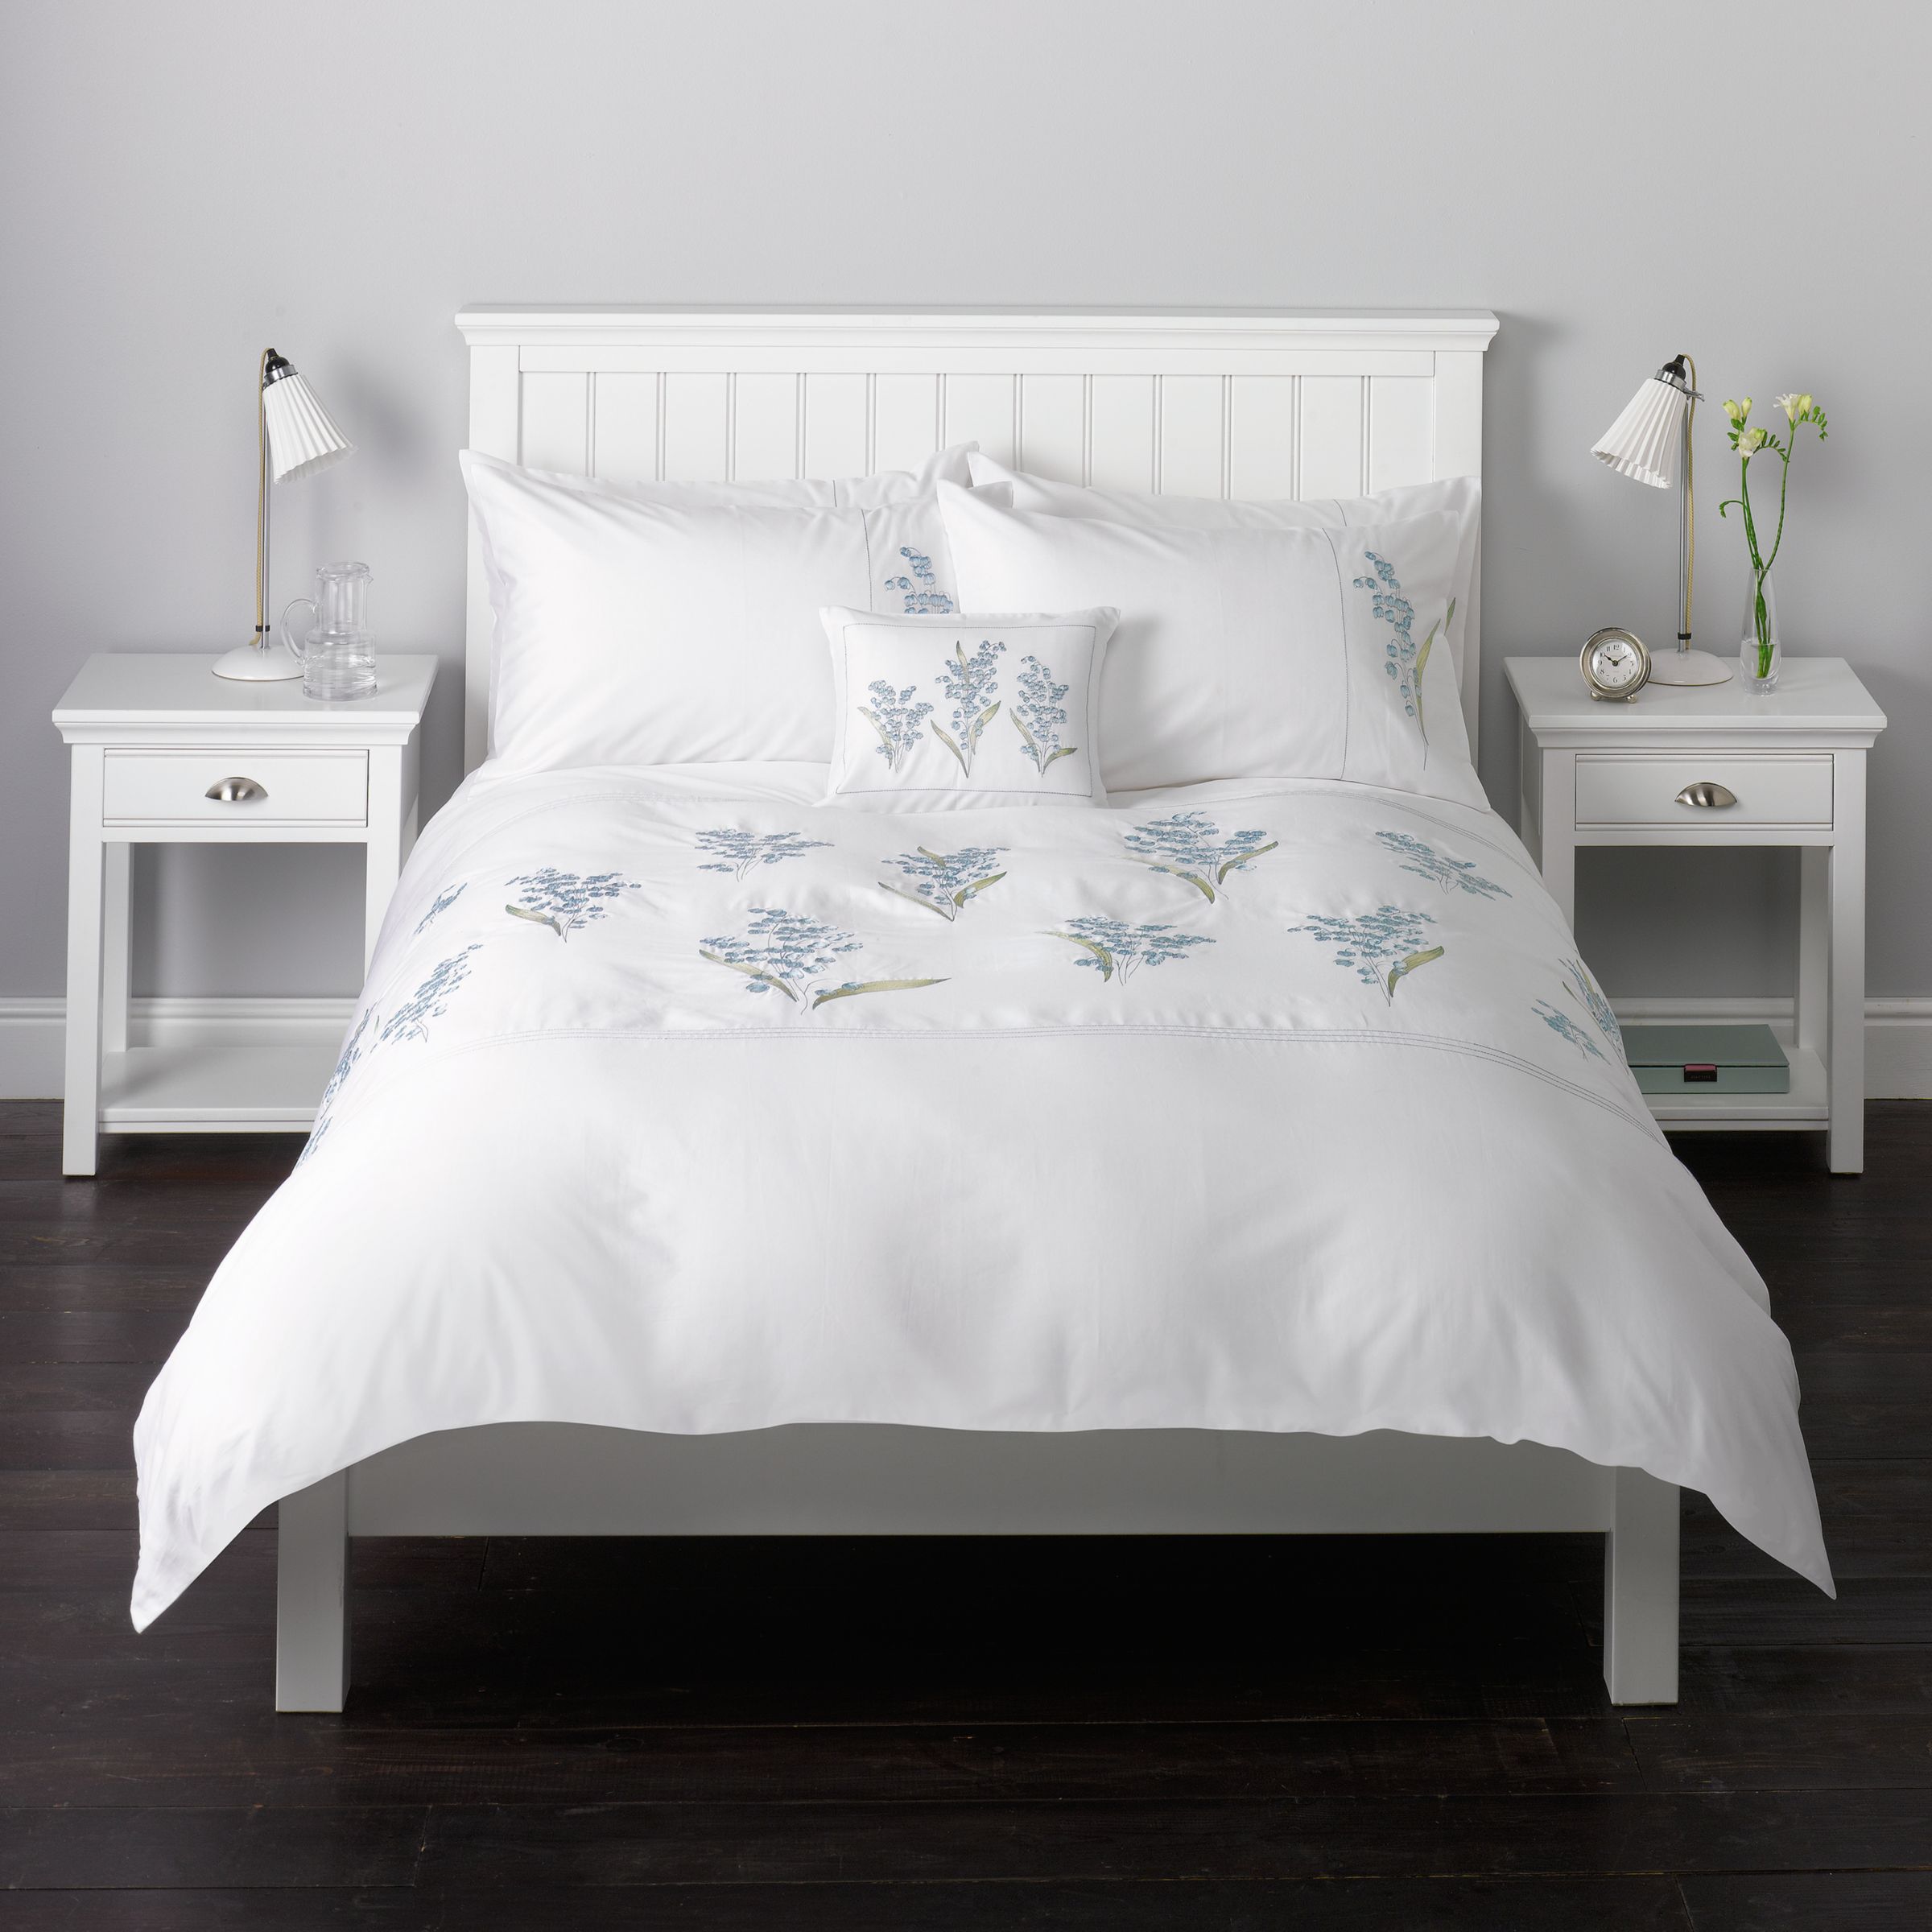 John Lewis Lily of the Valley Duvet Cover, Duck